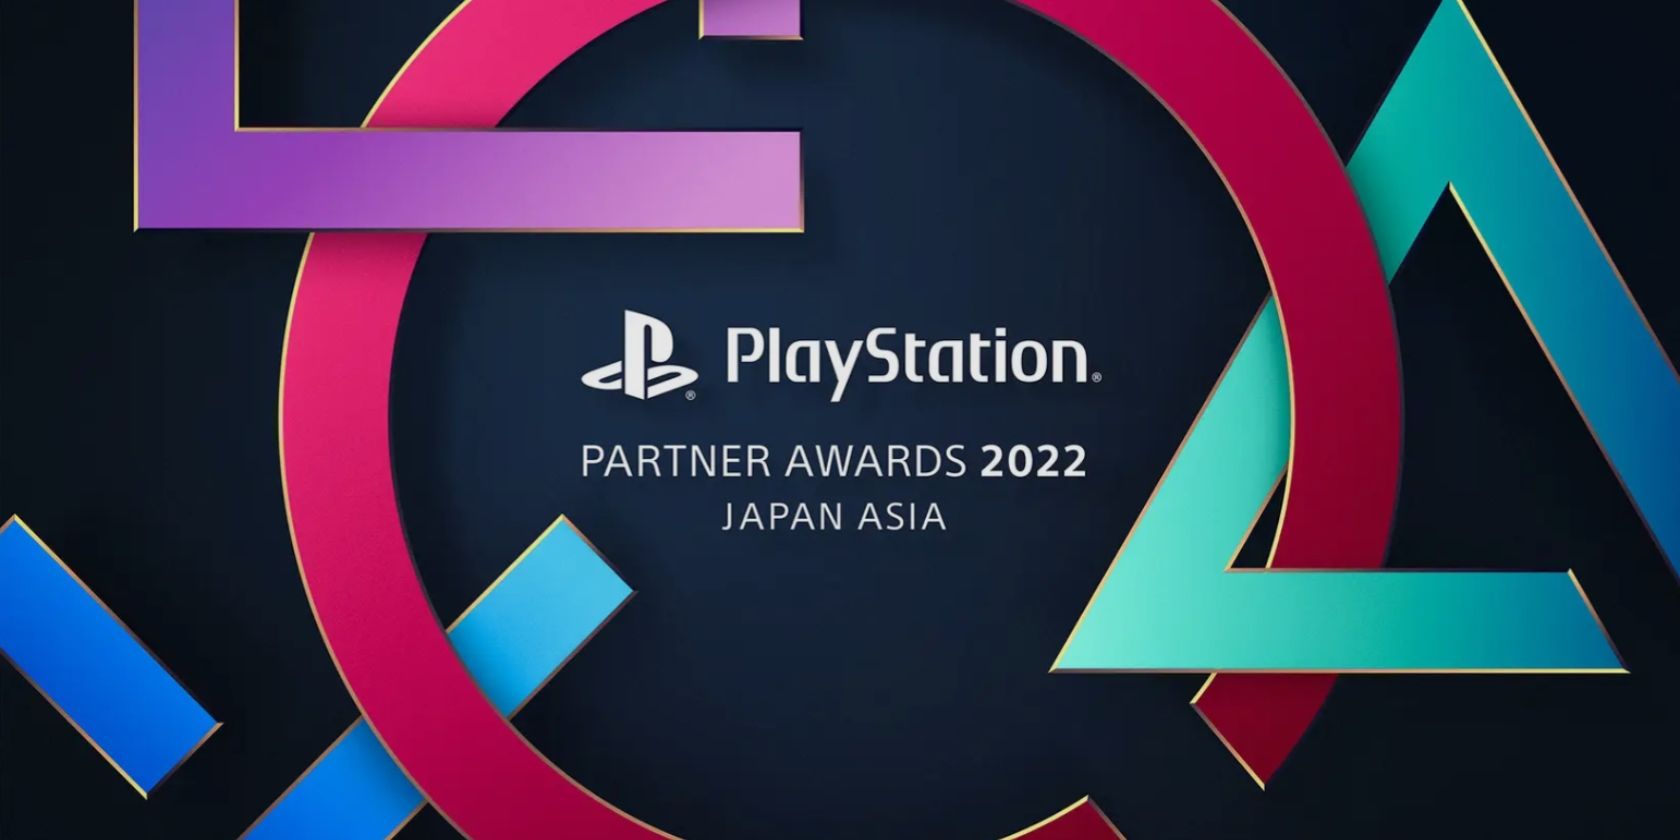 official PlayStation Partner Awards 2022 promotional graphic featuring PlayStation's signature buttons